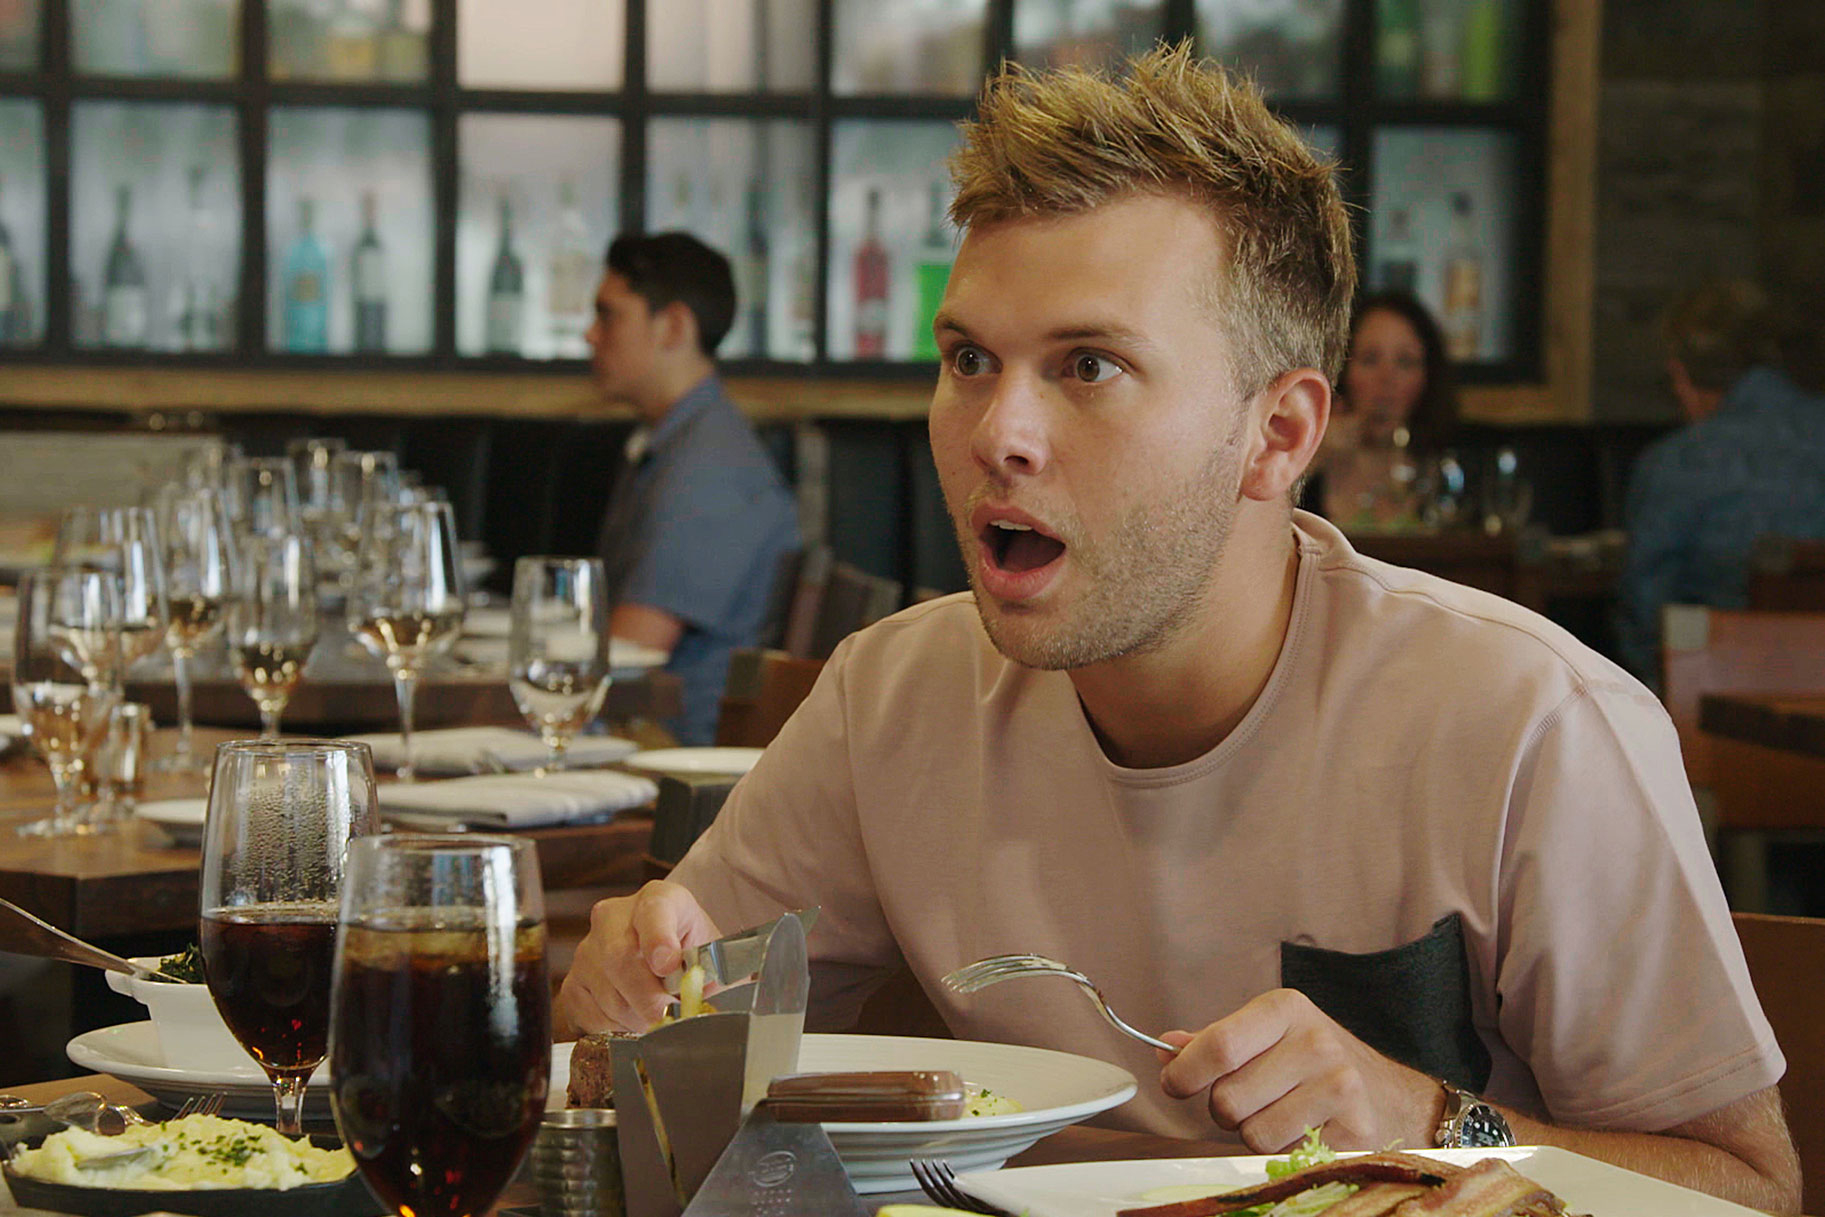 Chase Chrisley at dinner with a shocked expression on his face